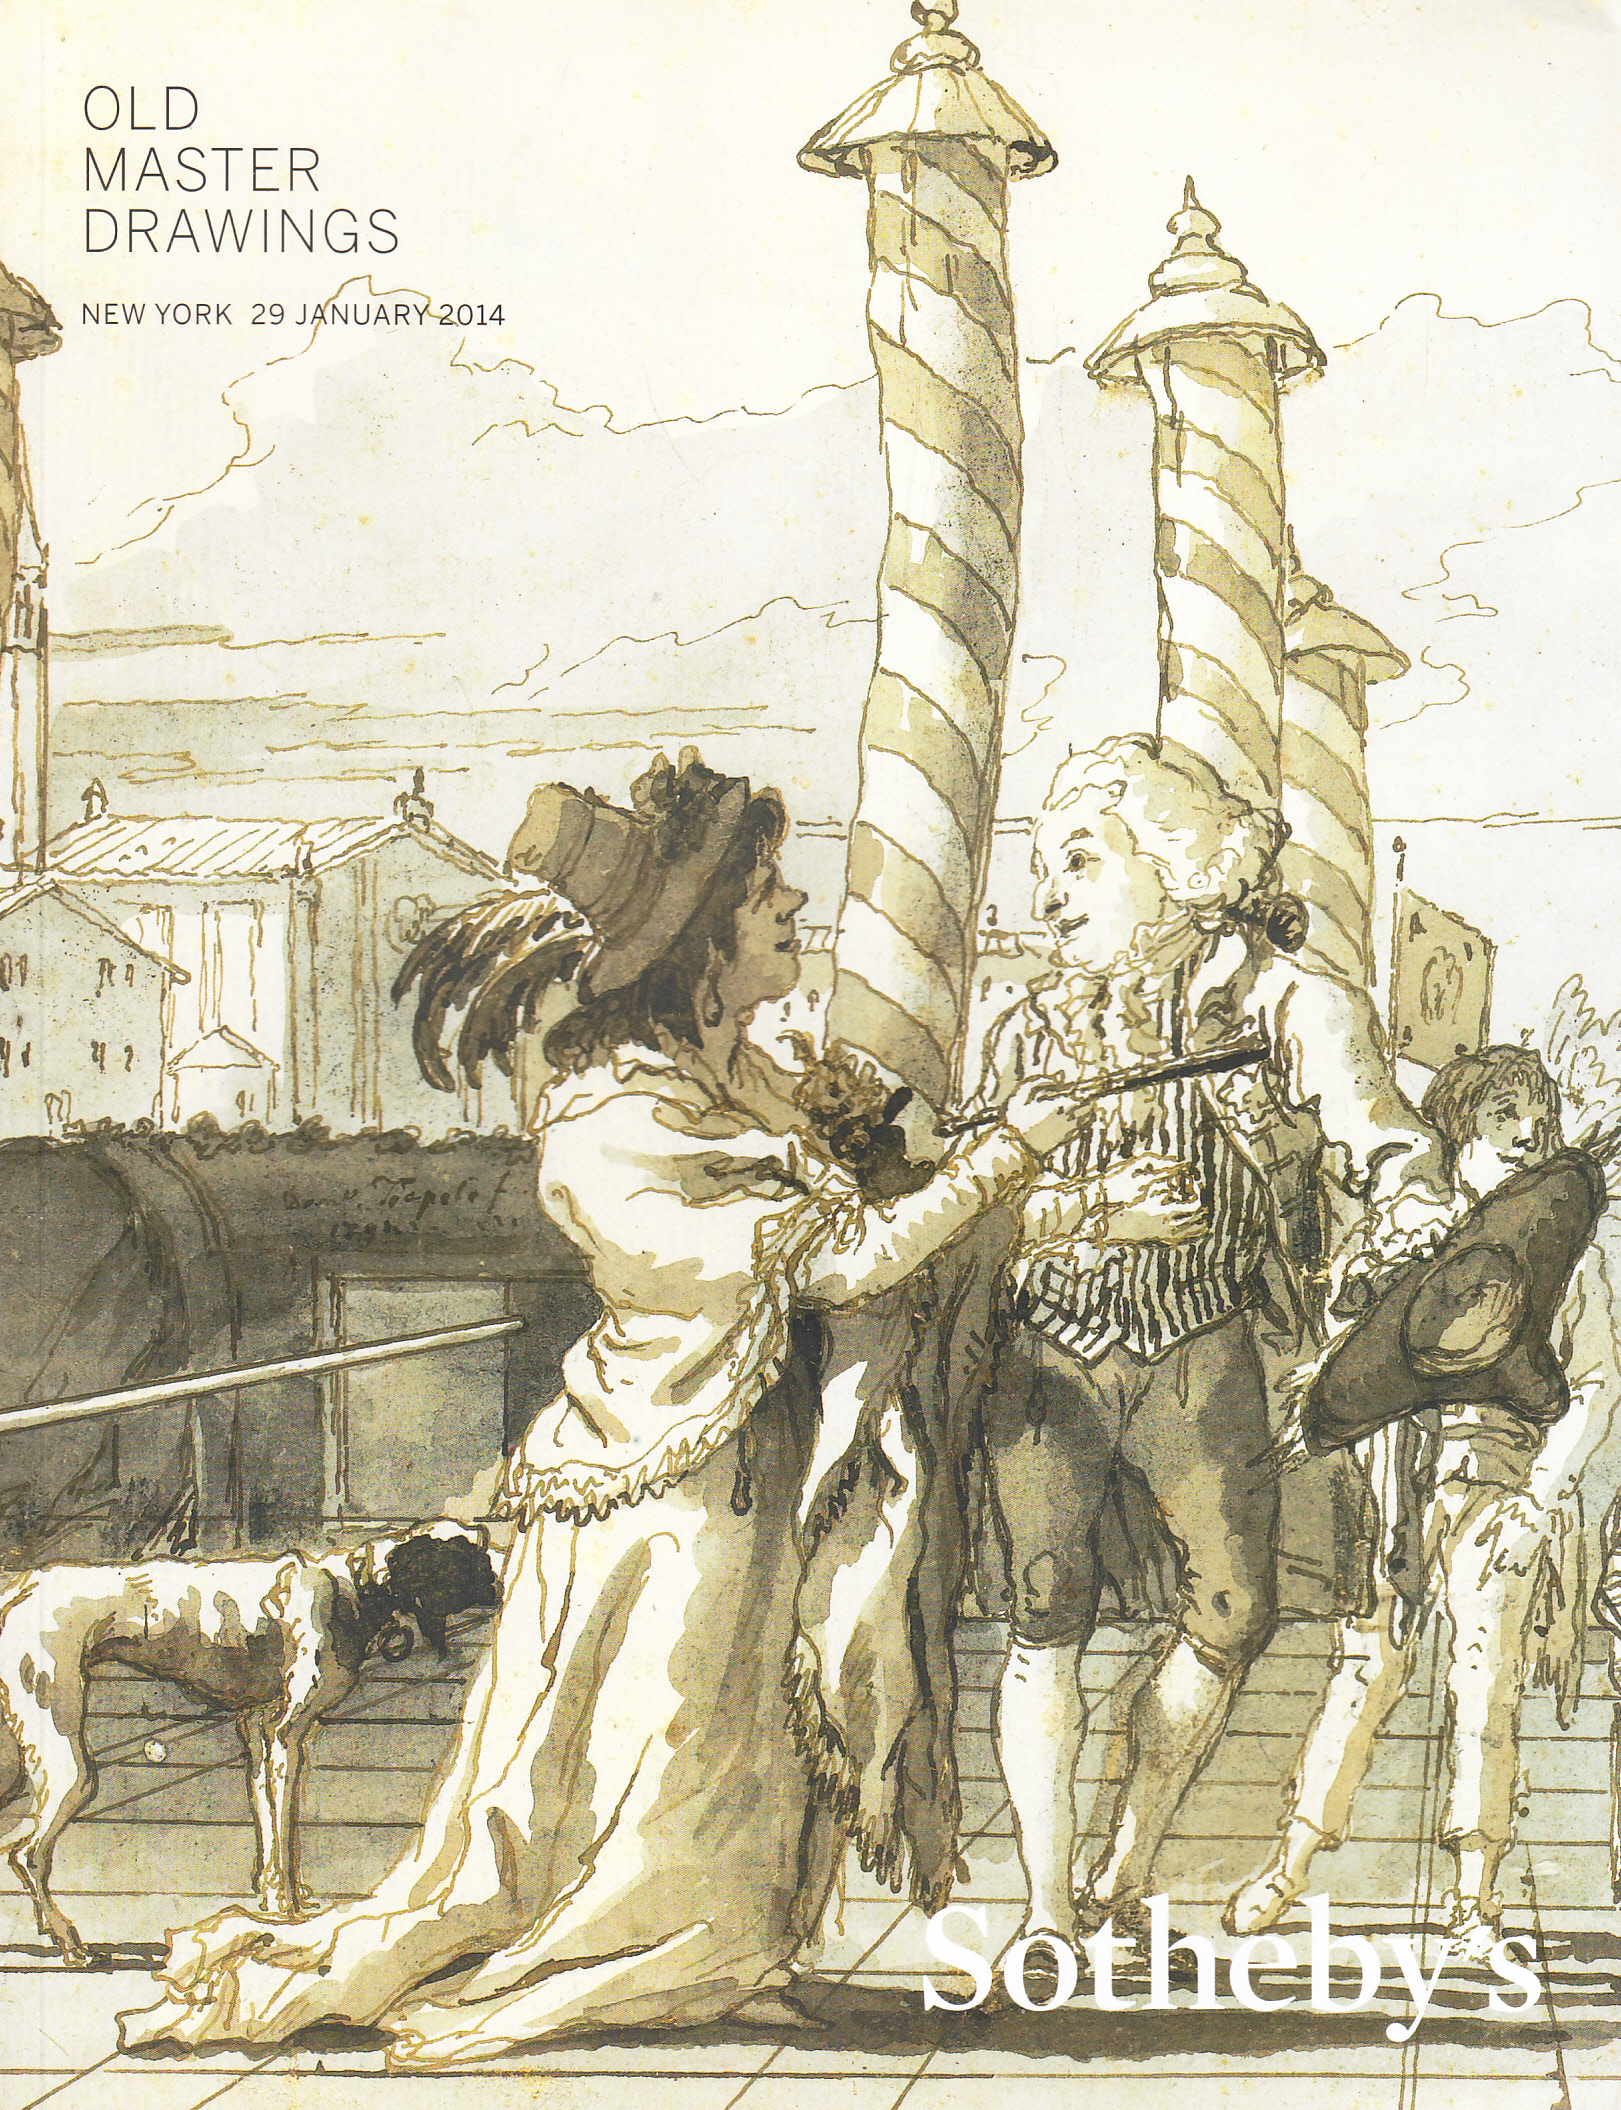 Sotheby's Old Master Drawings New York 1/29/14 Sale 9101 | Auction